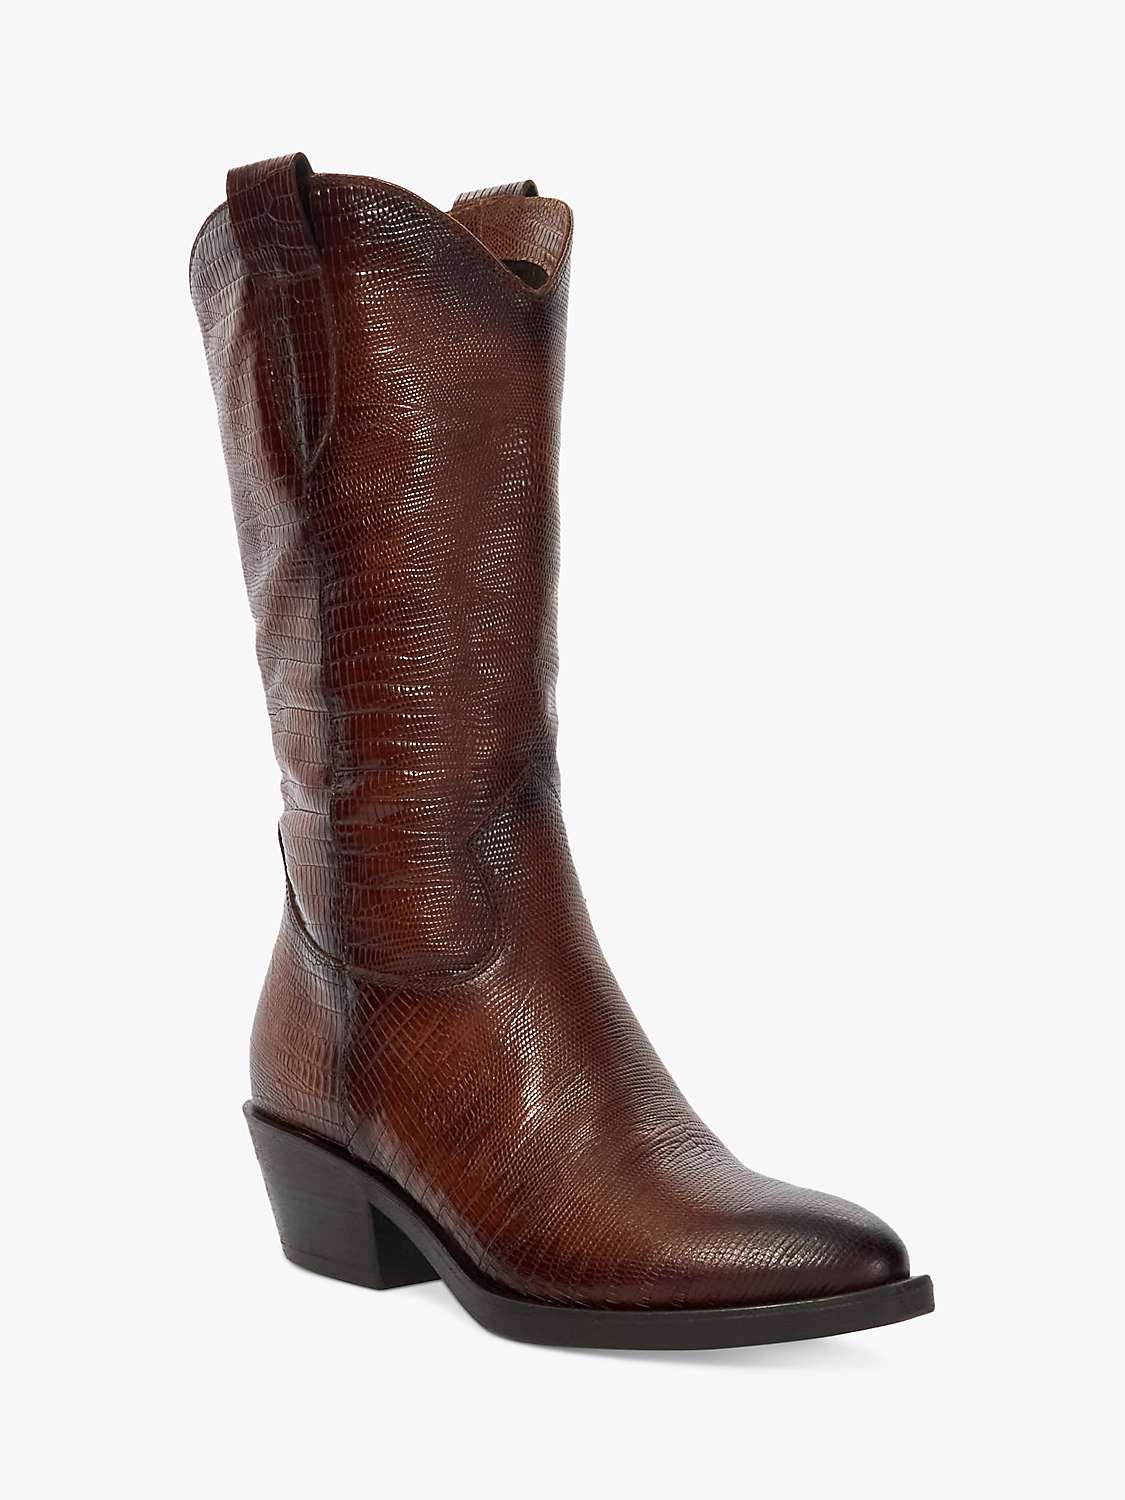 Buy Dune Tangle Reptile-Effect Leather Western Boots, Brown Online at johnlewis.com